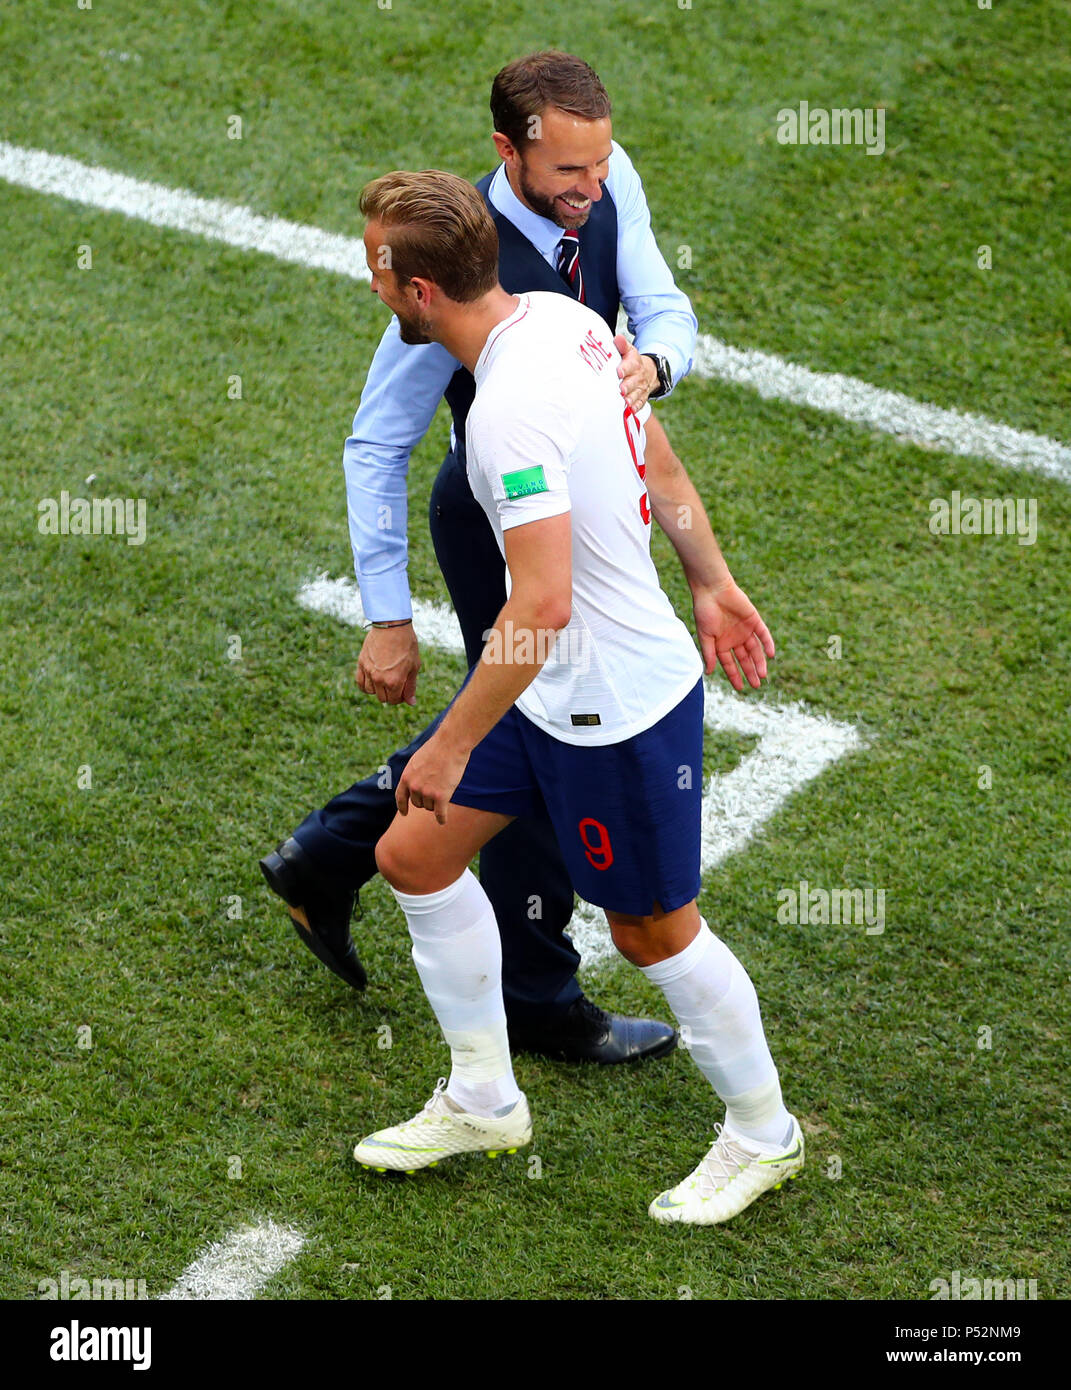 England's Harry Kane is congratulated by England manager Gareth Southgate as he is substituted off during the FIFA World Cup Group G match at the Nizhny Novgorod Stadium. PRESS ASSOCIATION Photo. Picture date: Sunday June 24, 2018. See PA story WORLDCUP England. Photo credit should read: Tim Goode/PA Wire. Stock Photo